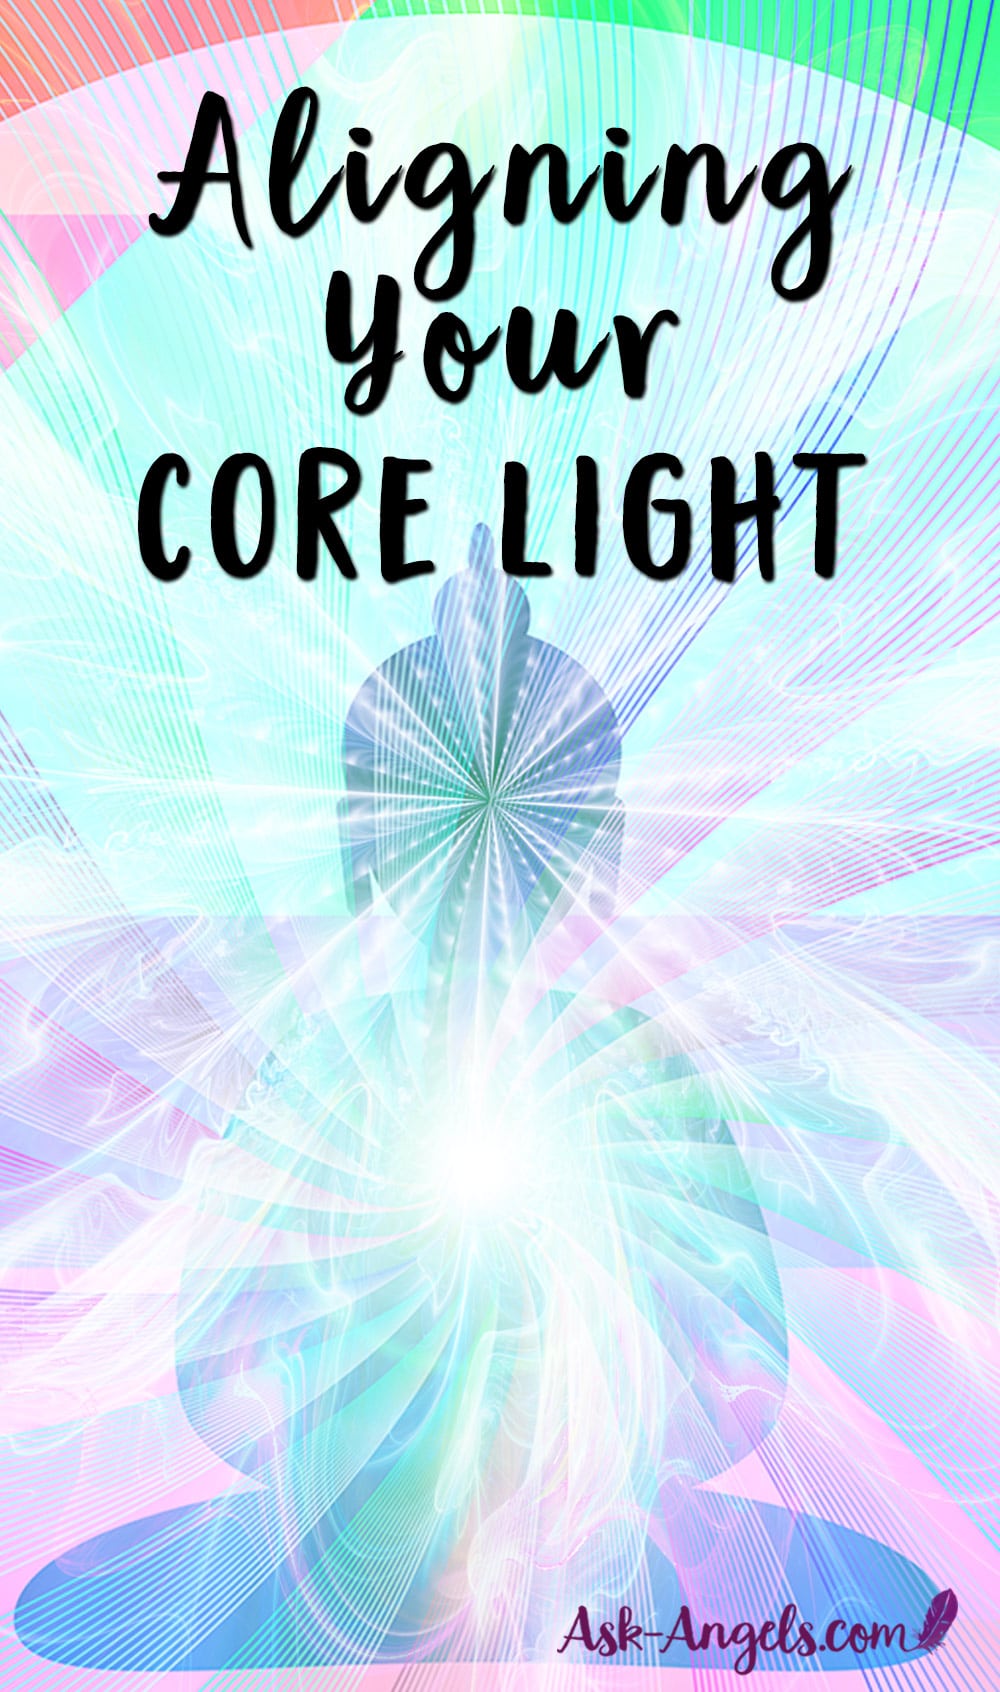 Aligning Your Core Light